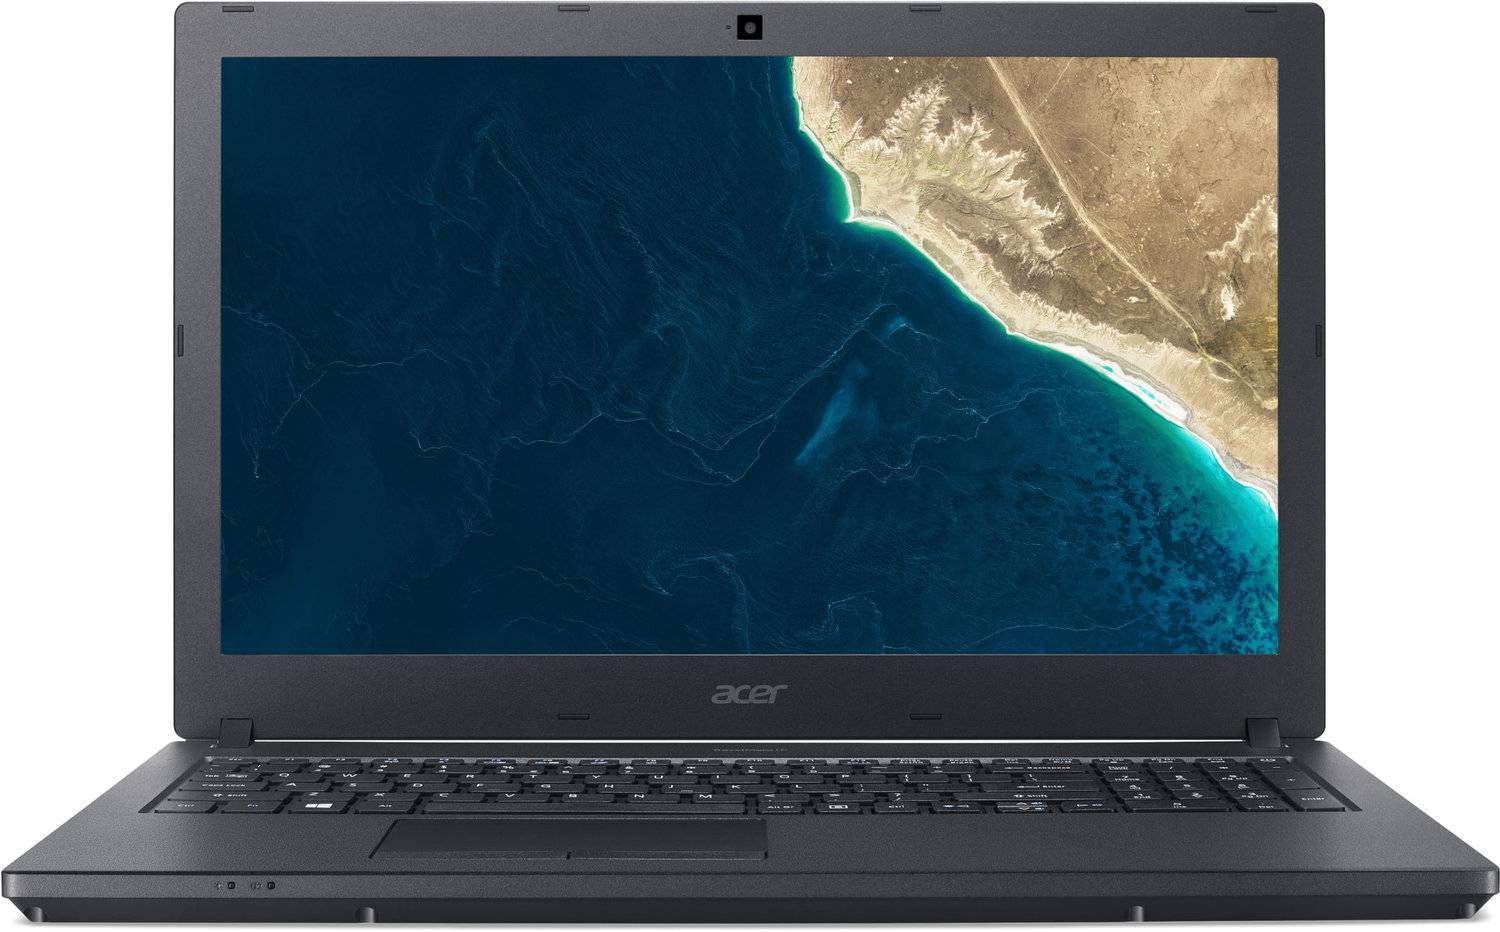 Acer travelmate tmb118. Acer TRAVELMATE p2 tmp2510-g2-MG-30le. Acer TRAVELMATE p2510. Ноутбук Acer TRAVELMATE p2. Acer tmb118-m-c6ut ноутбук.